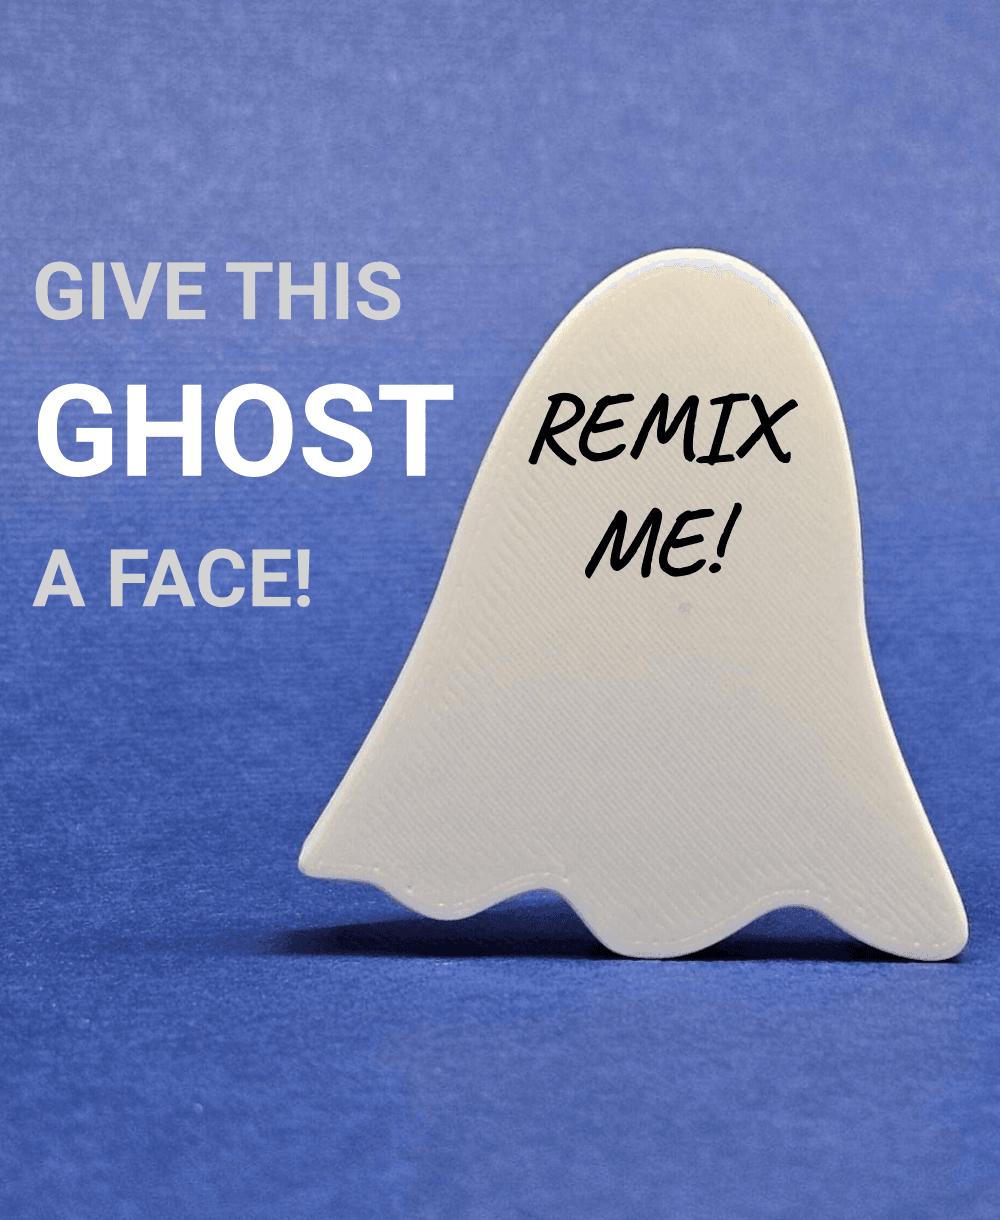 Blank Ghost | Remix me! | Give this ghost a face for Halloween! 3d model